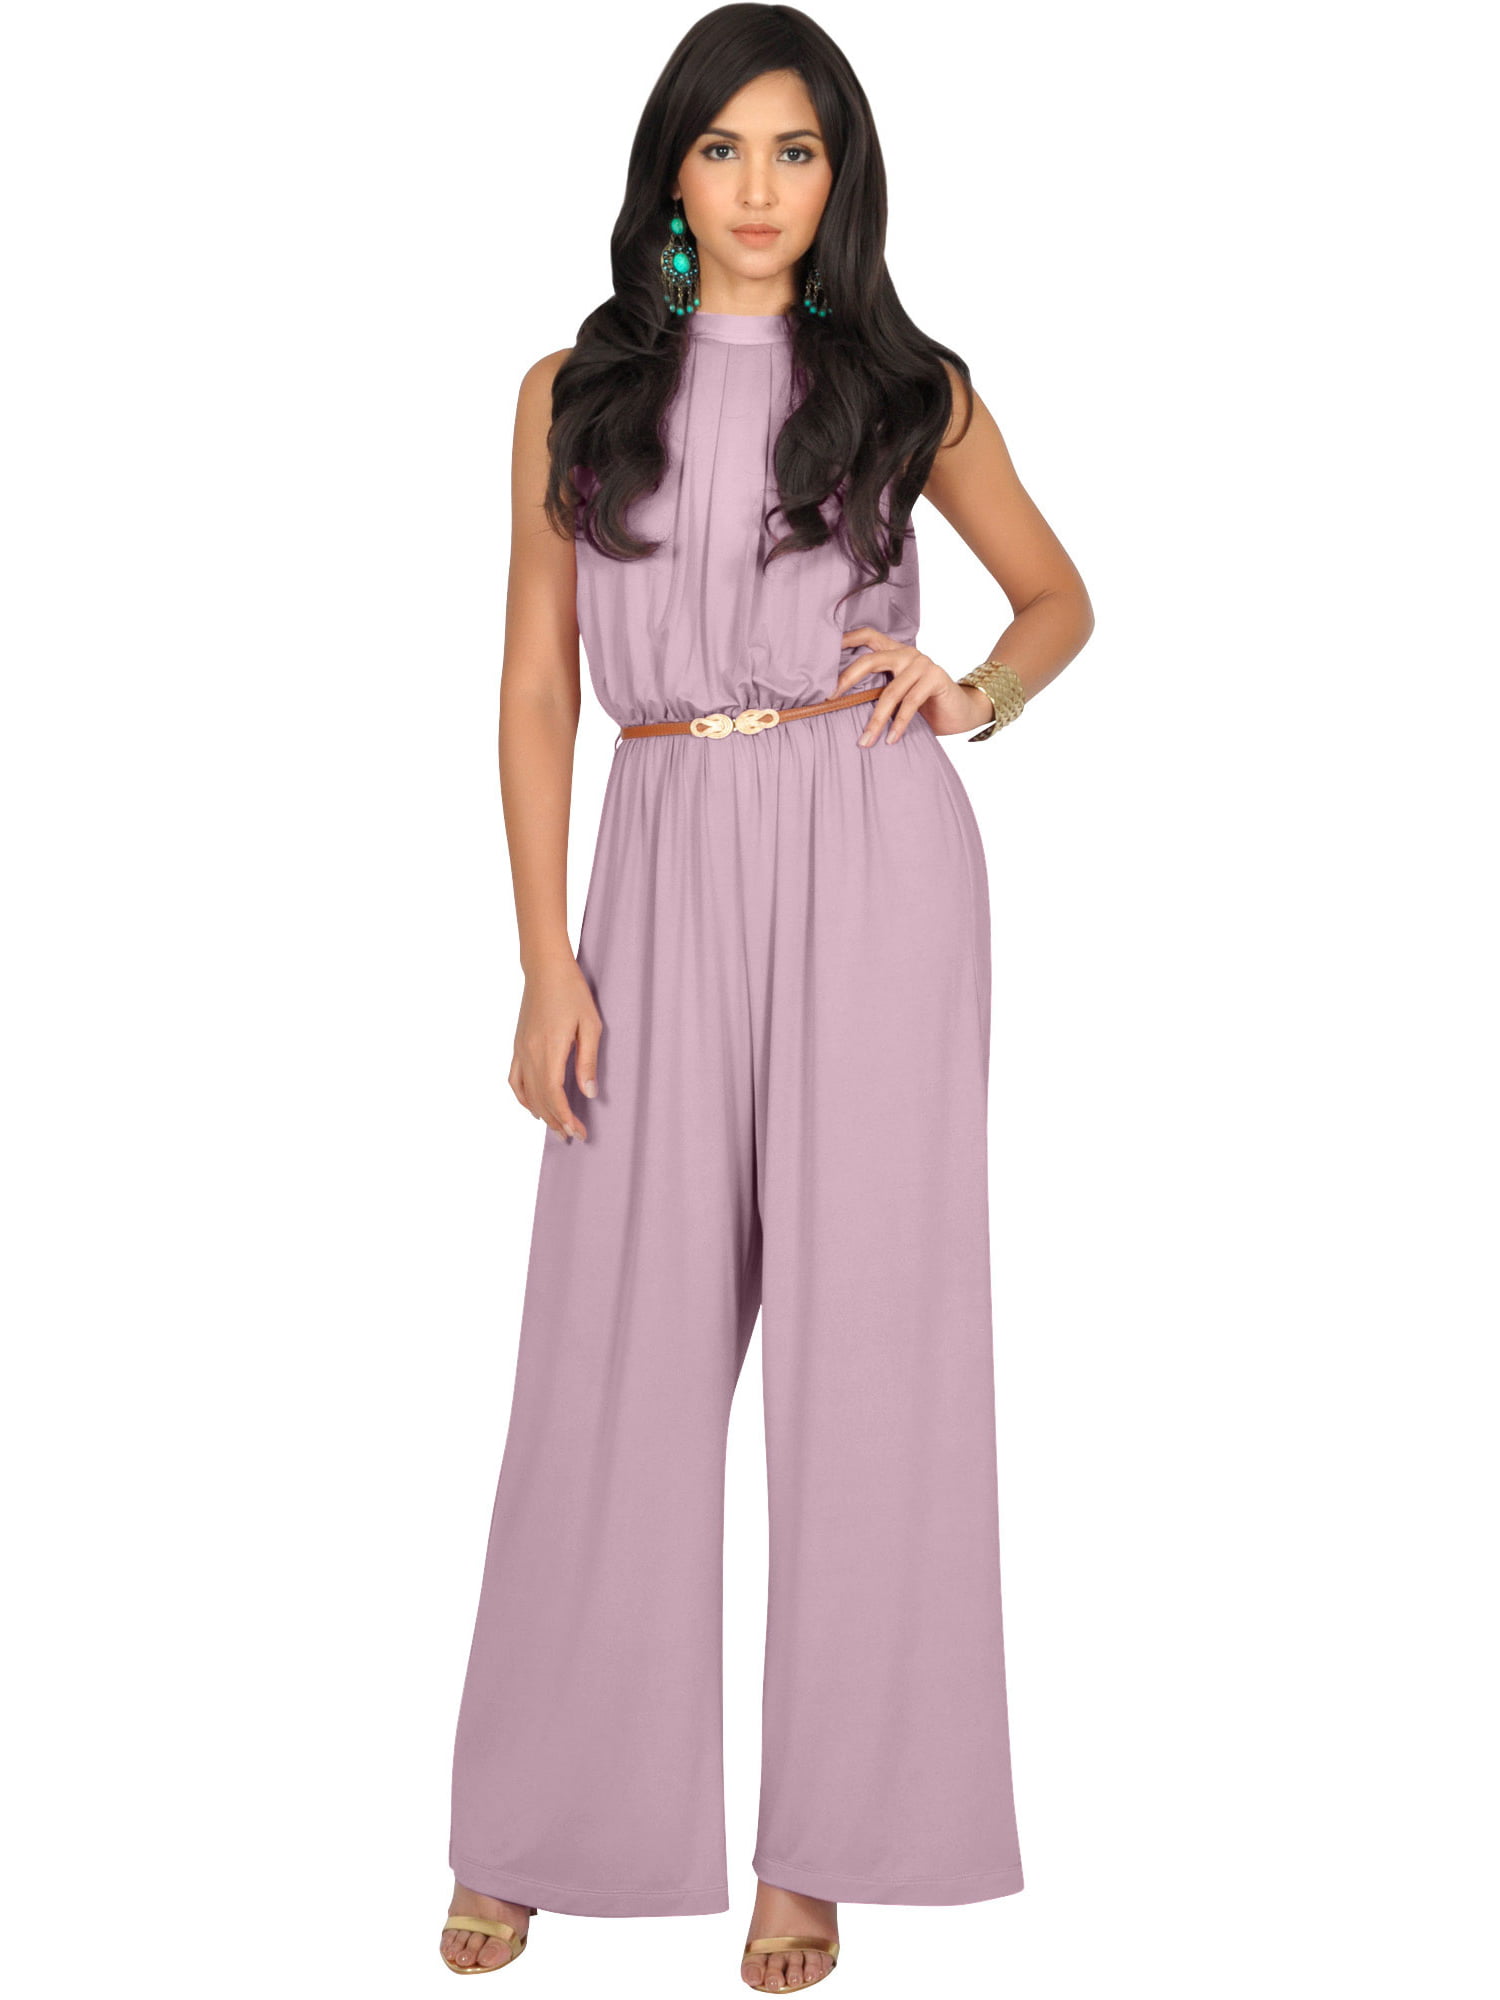 KOH KOH Long Pants Jumpsuit Formal One Piece Cocktail Evening Fall Dressy  Pantsuit Romper Workwear Casual Outfit Tall Sleeveless Playsuit For Women  Plum Light Purple X-Large US 14-16 NT202 